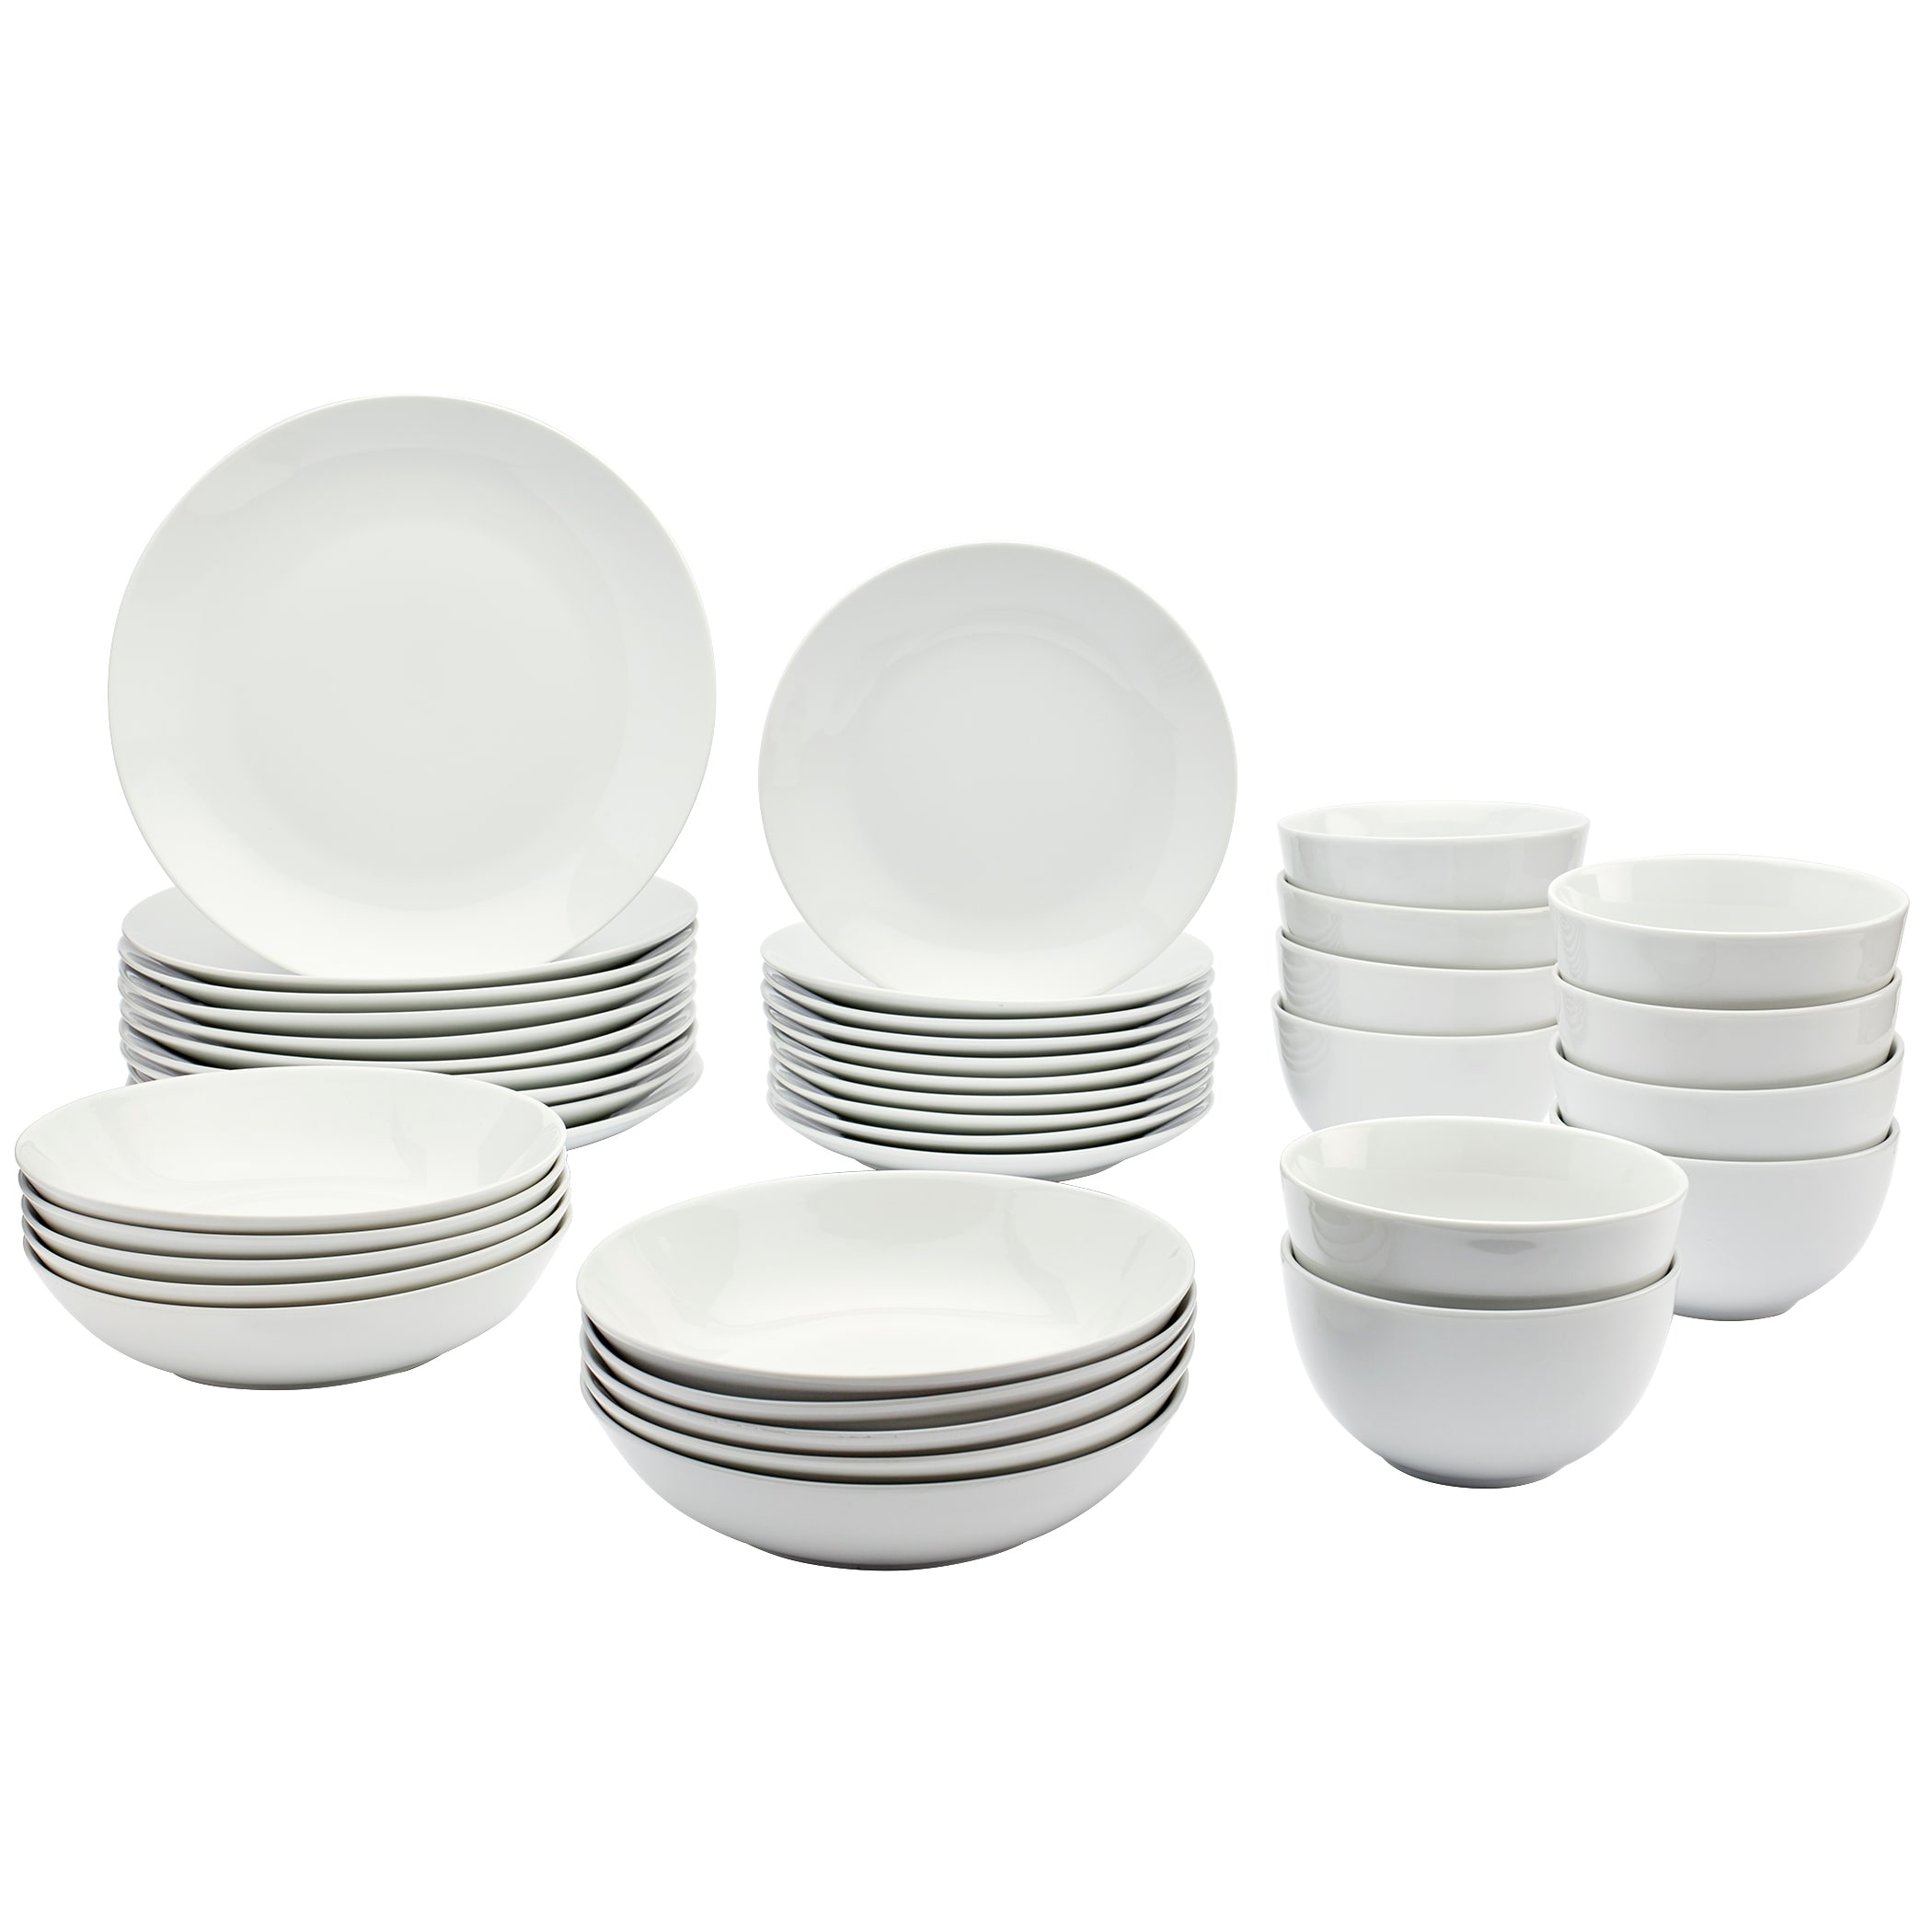 https://ak1.ostkcdn.com/images/products/is/images/direct/8696c9a0fdc34461d7c1d2f8169121b343f22e87/Tabletops-Gallery-40PC-White-Adams-Dinnerware-Set.jpg